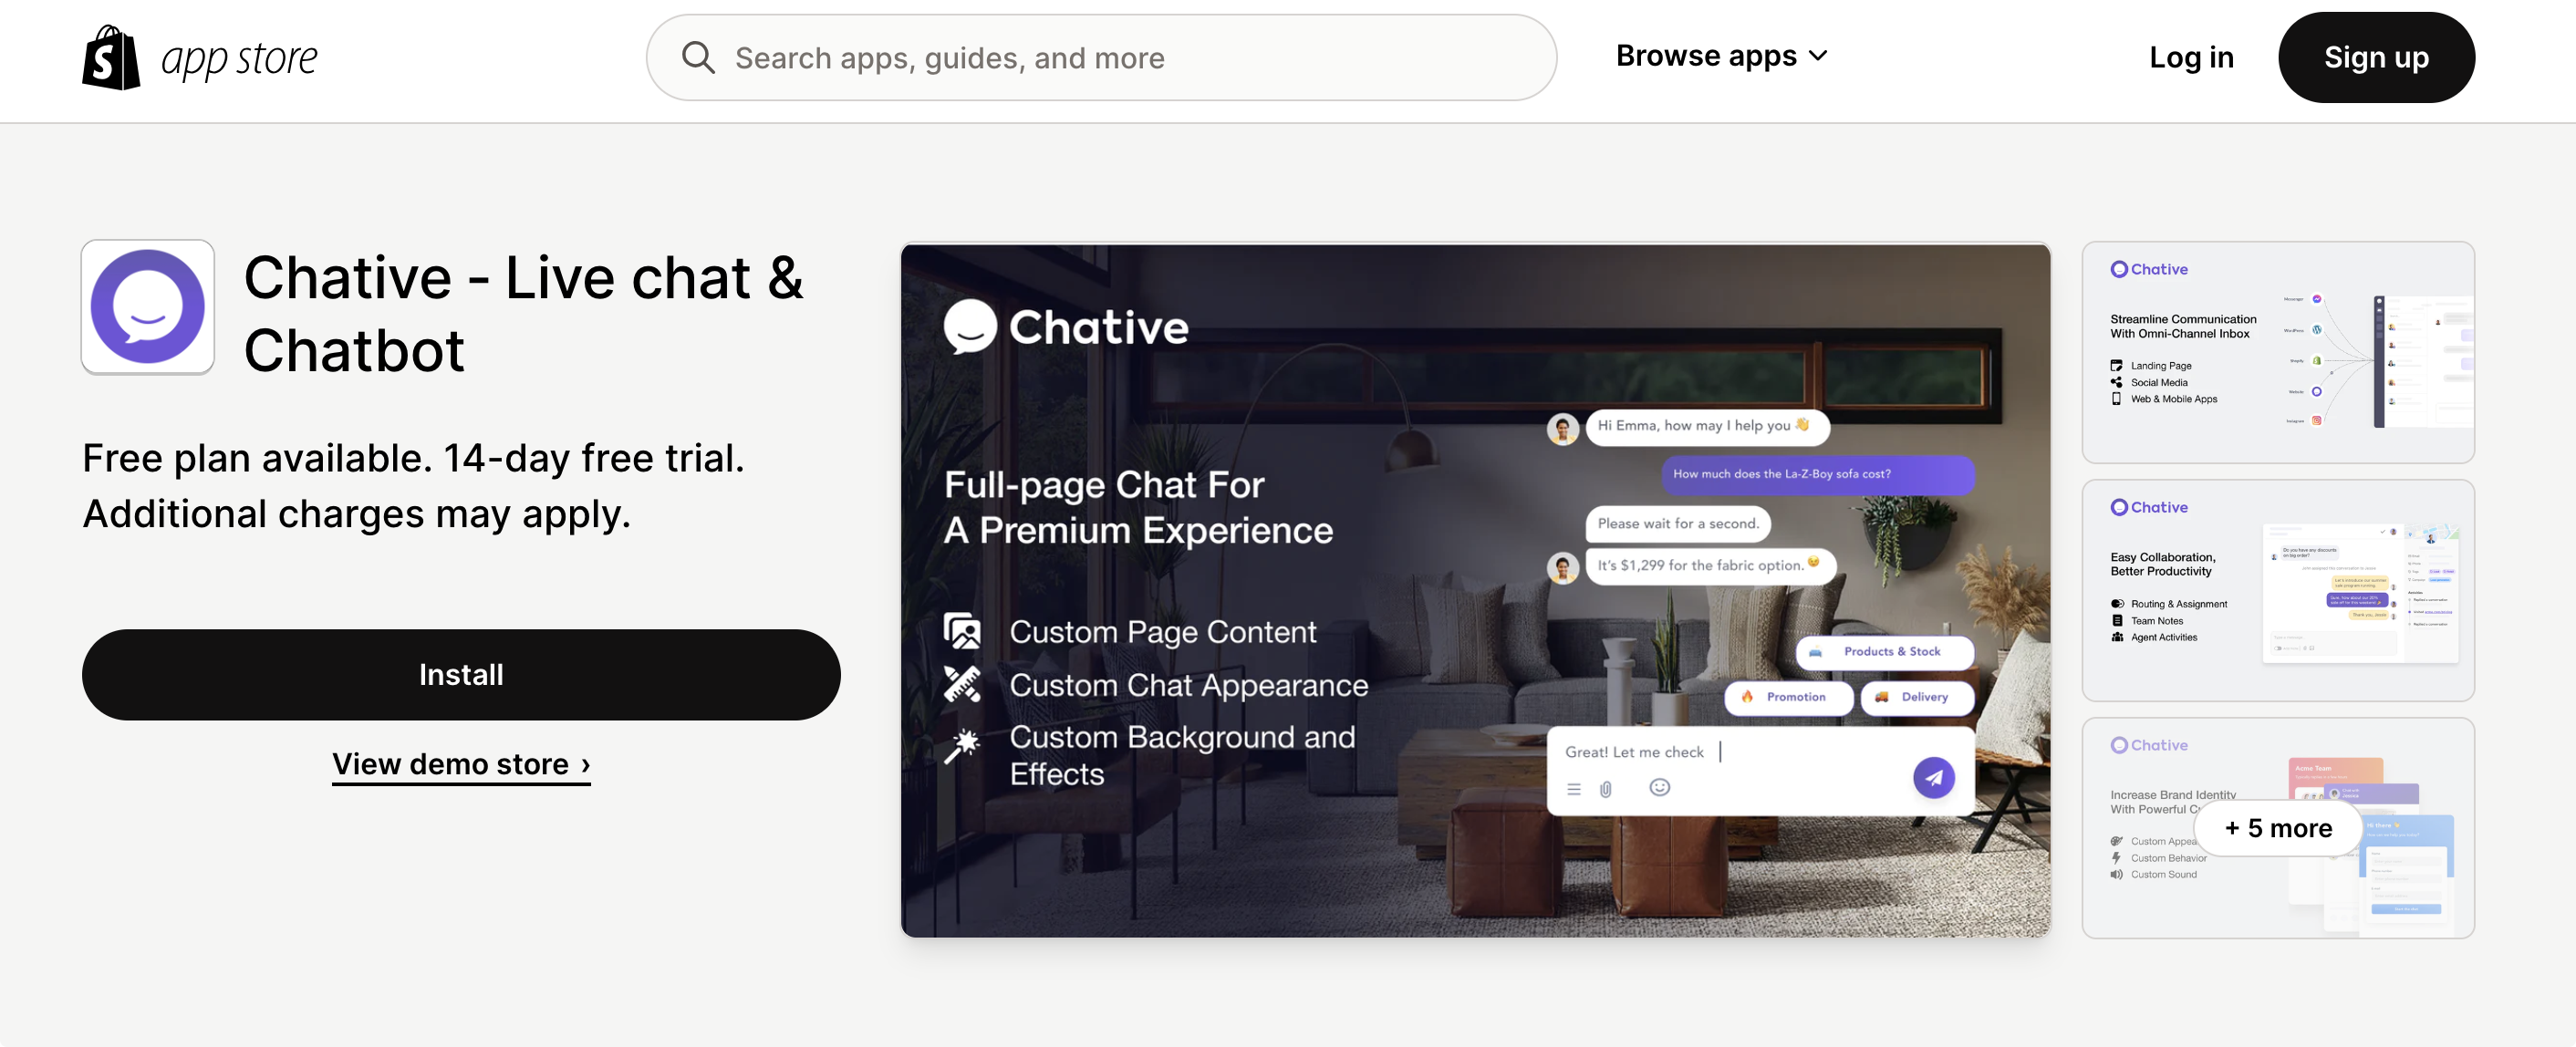 Install Chative ‑ Live chat &amp; Chatbot